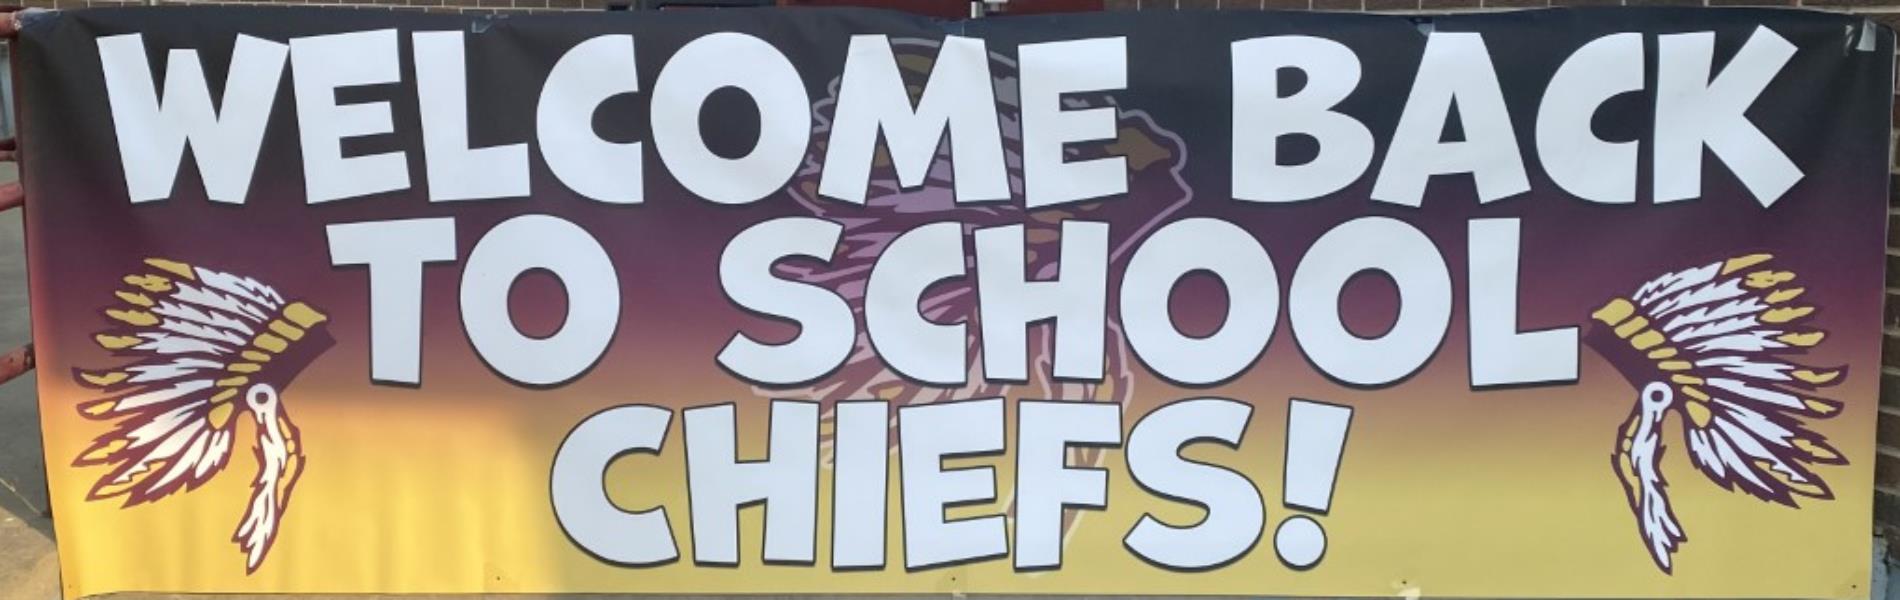 welcome back to school chiefs